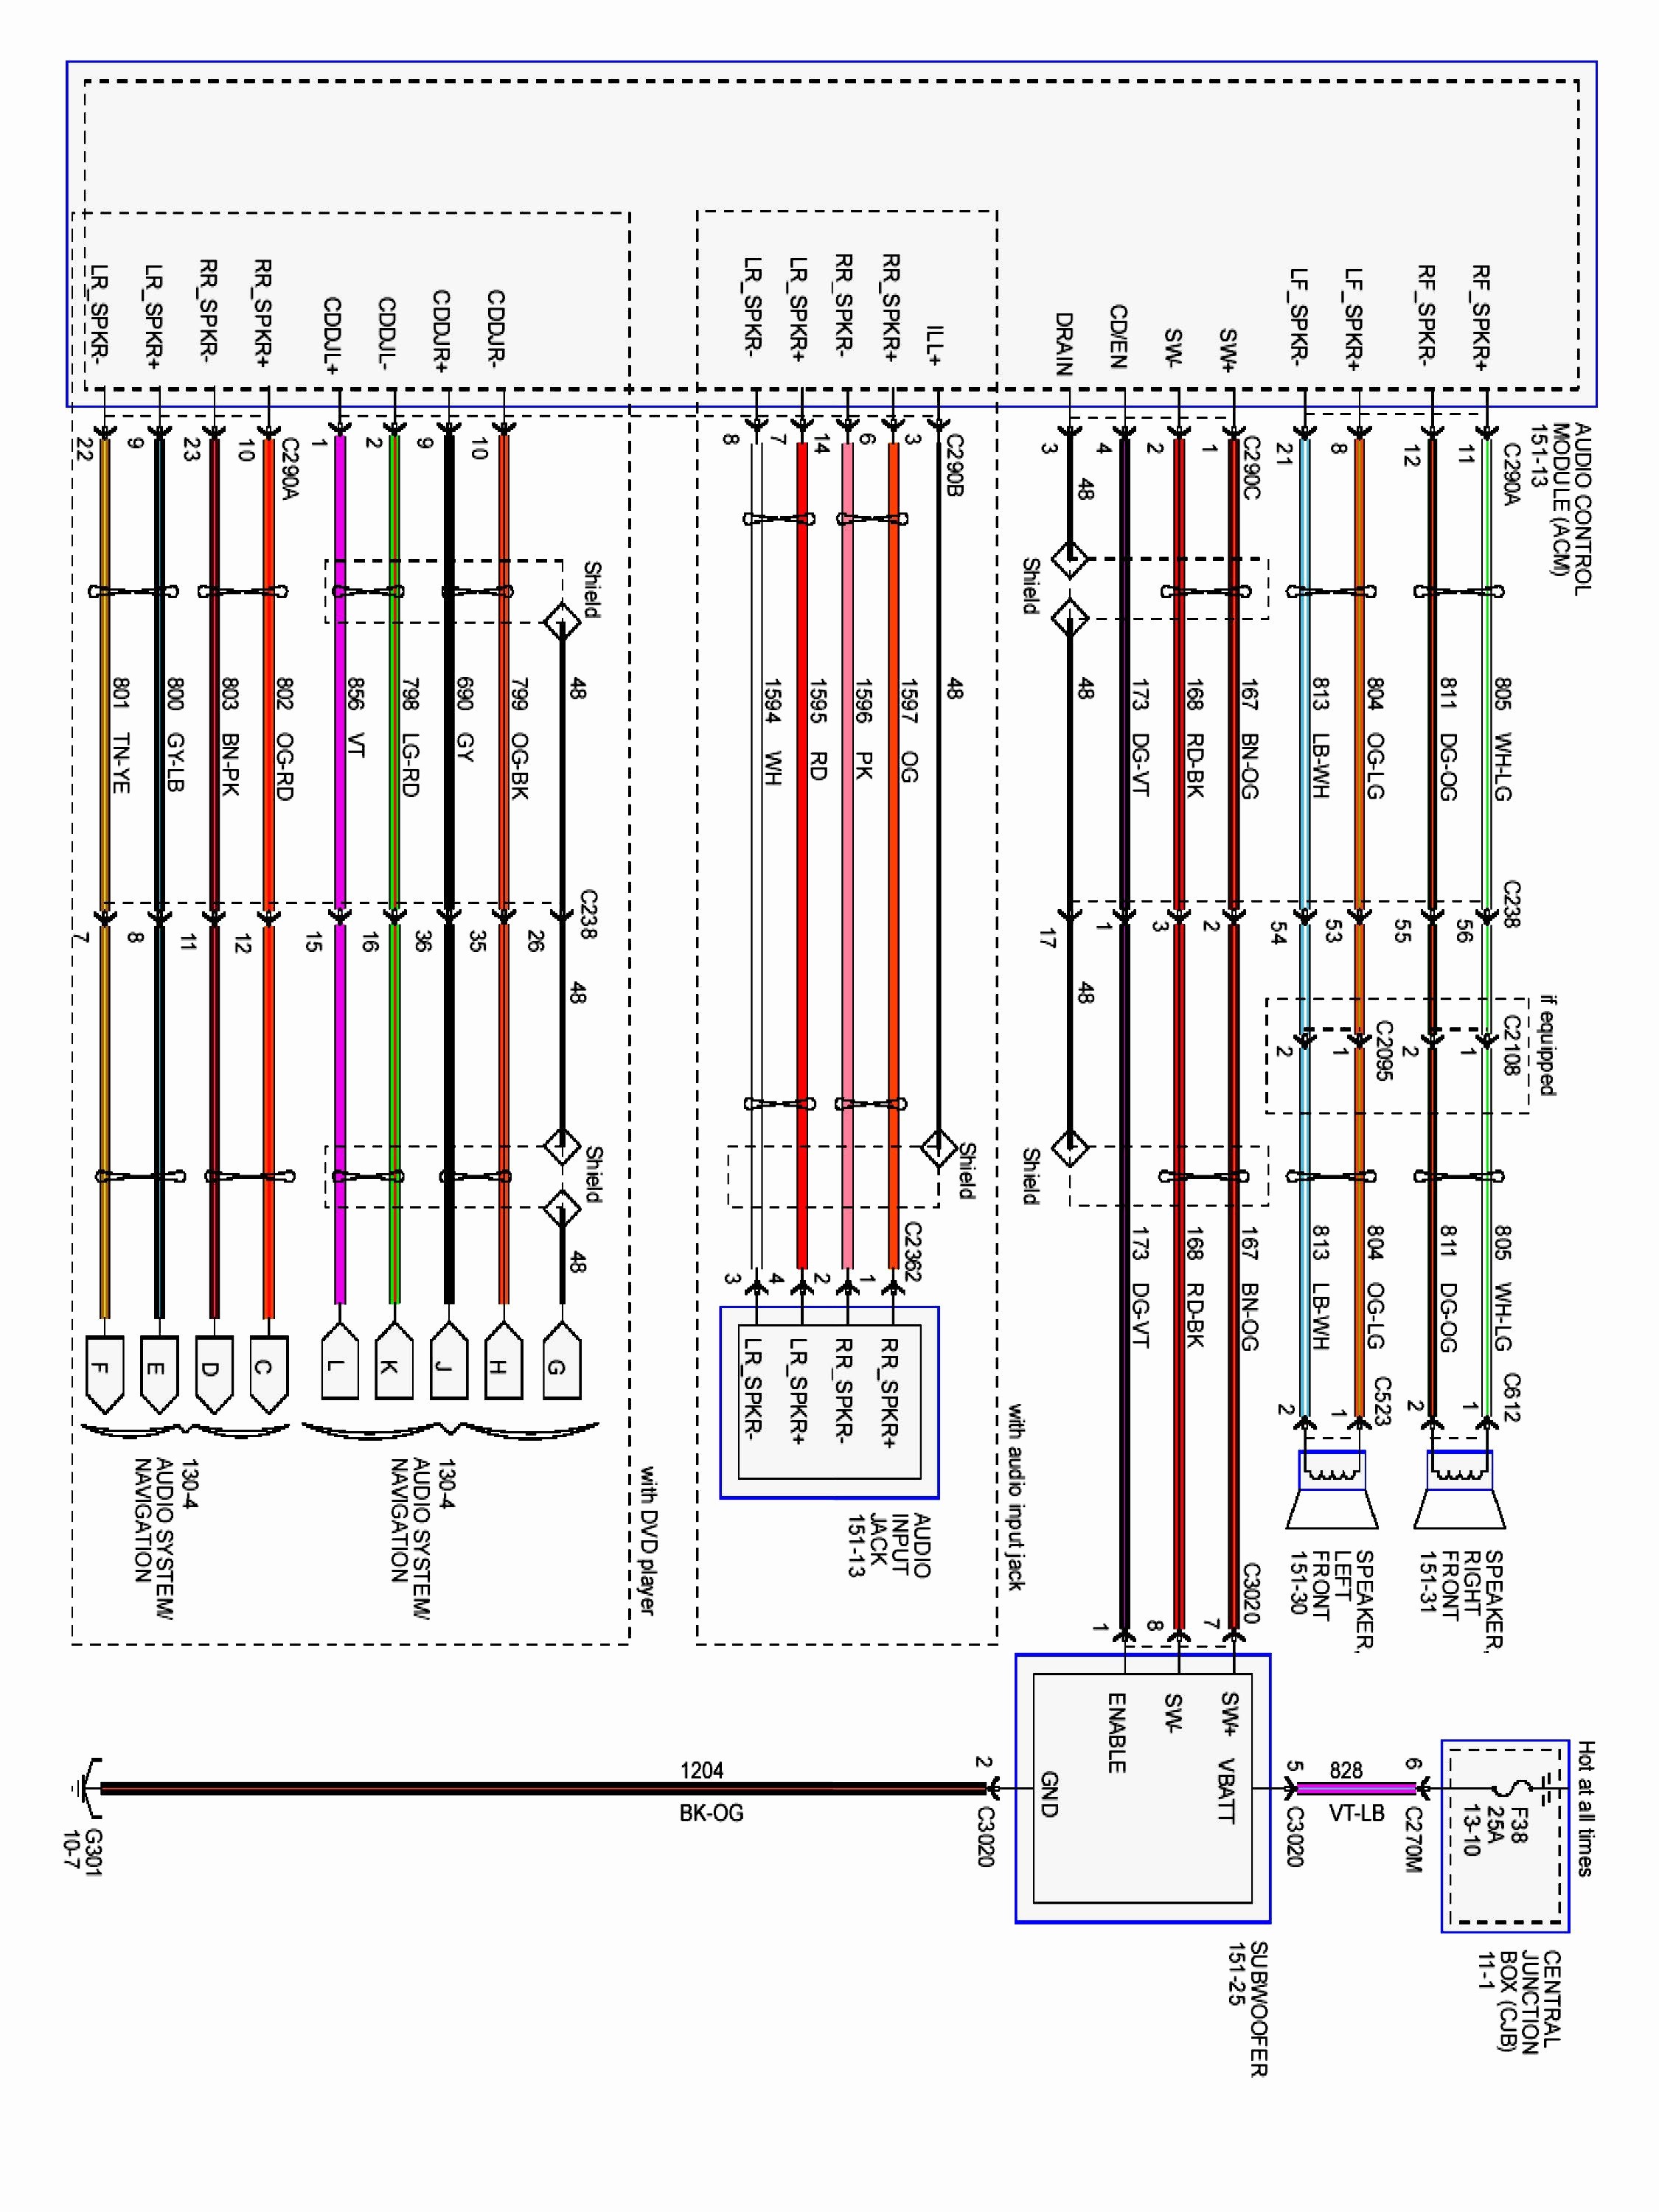 Full Size of Wiring Diagram Taylor Dunn Wiring Diagram Beautiful Wiring Color Code Chart Zen